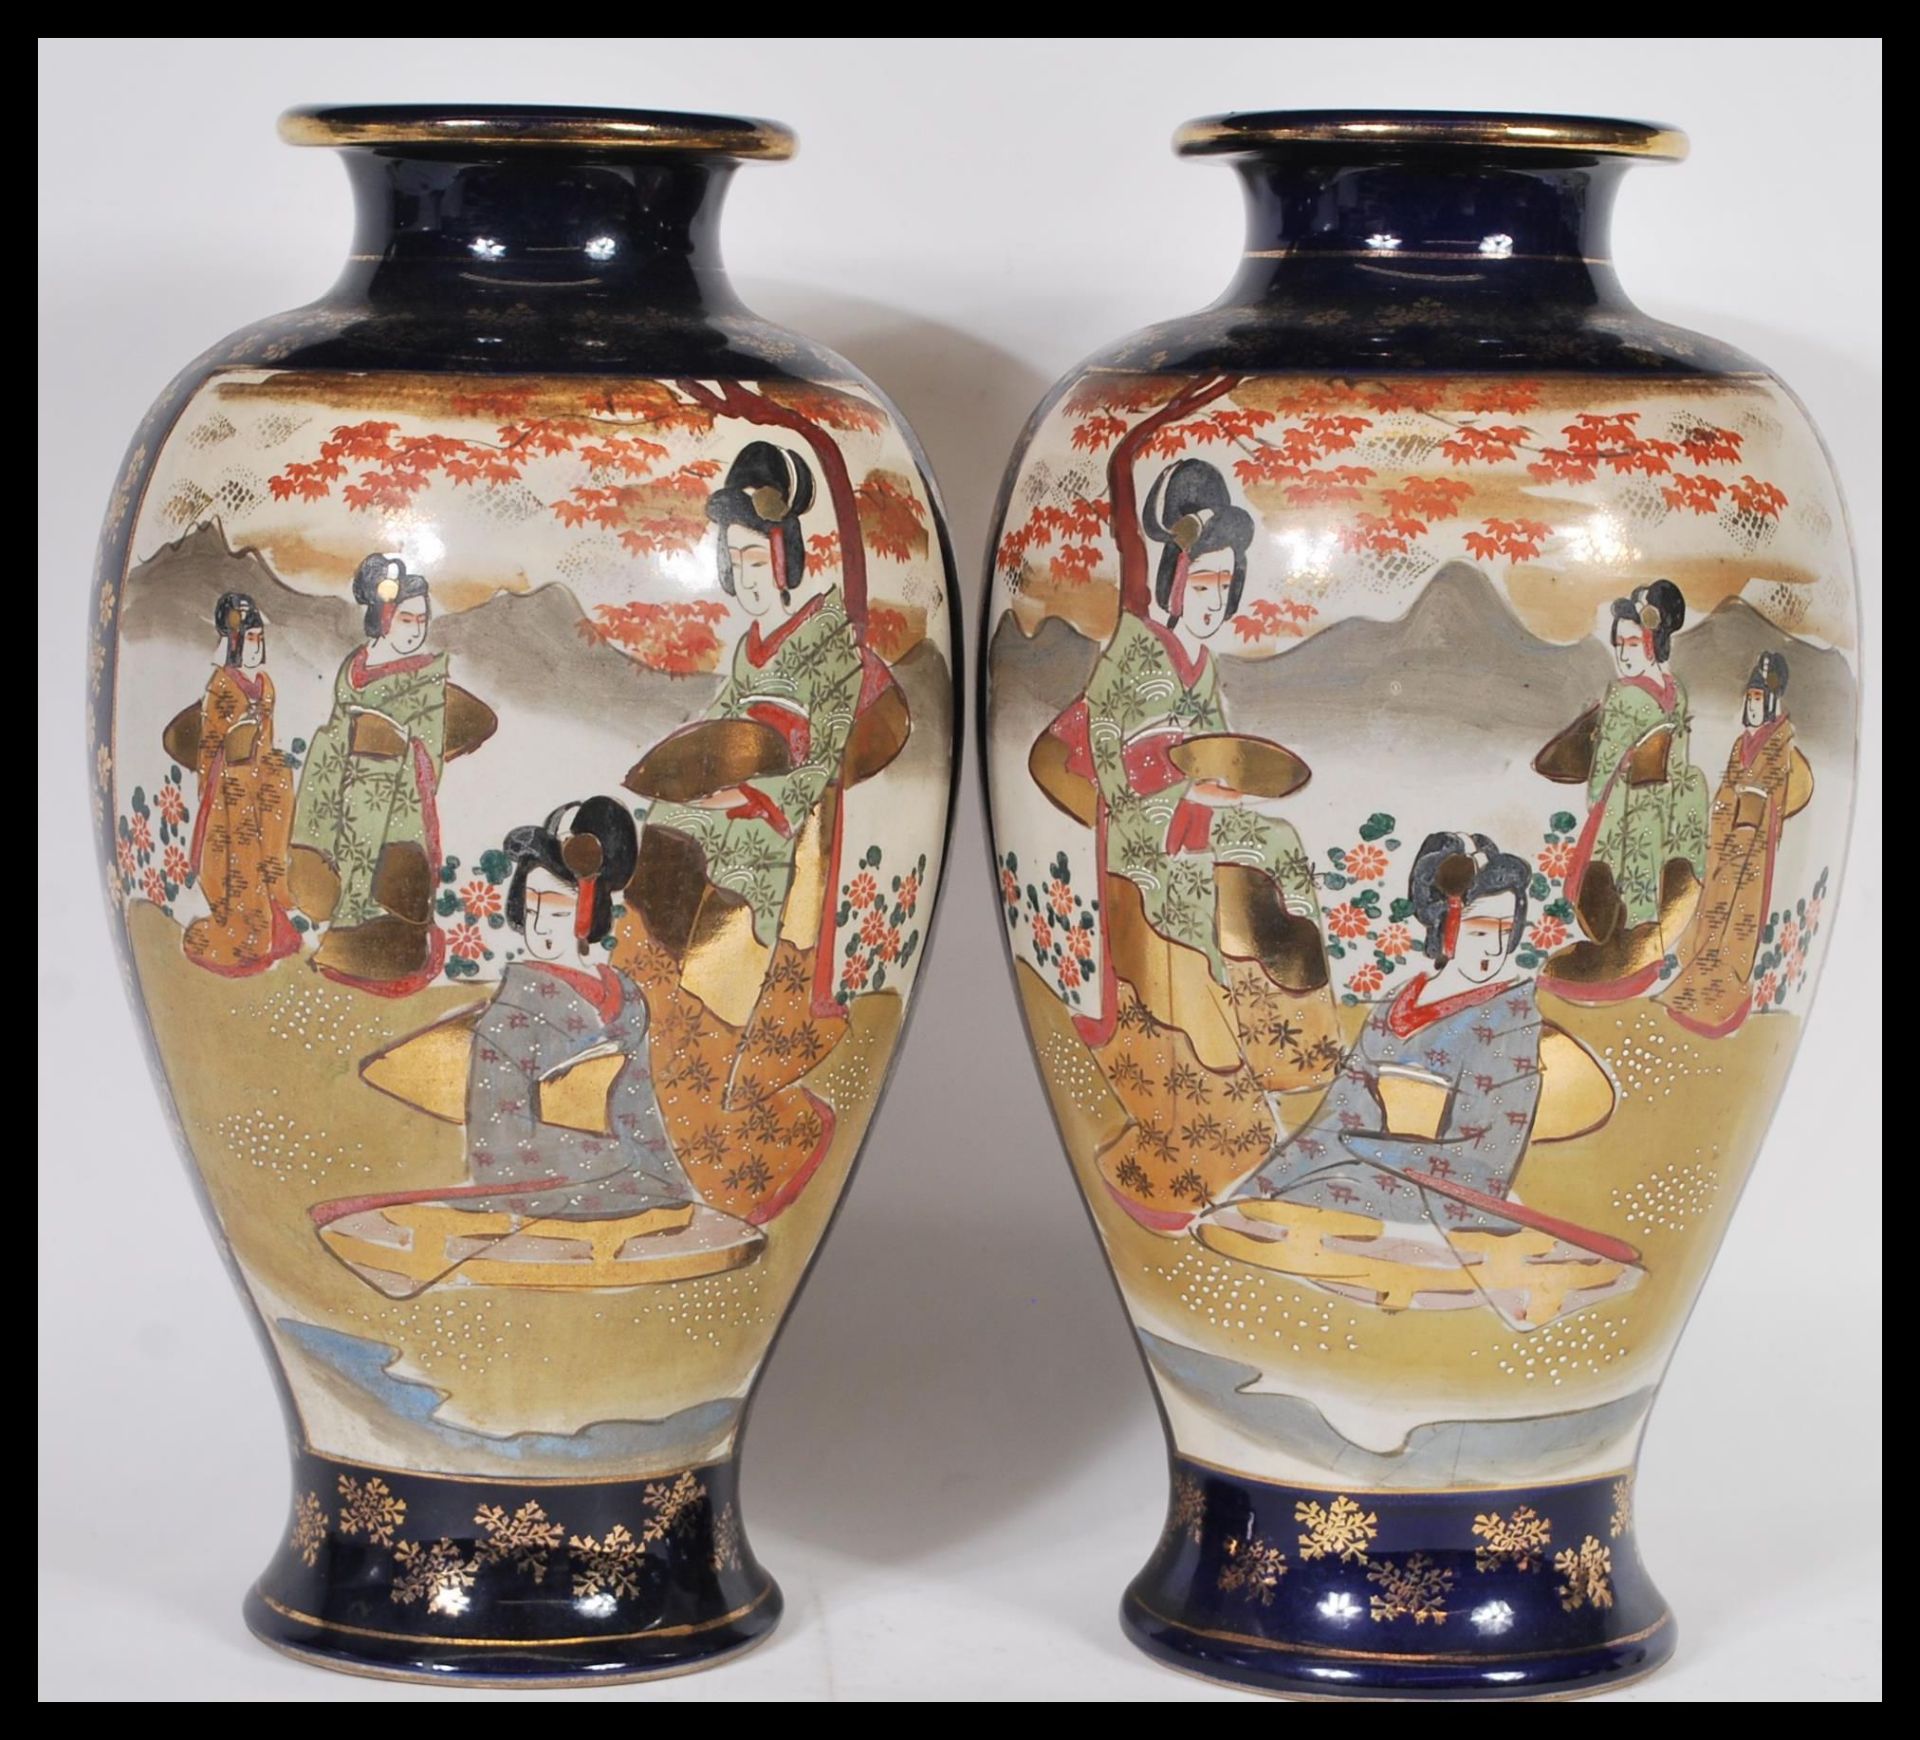 A large pair of Japanese early 20th century baluster vases, each with decorative Geisha scenes and